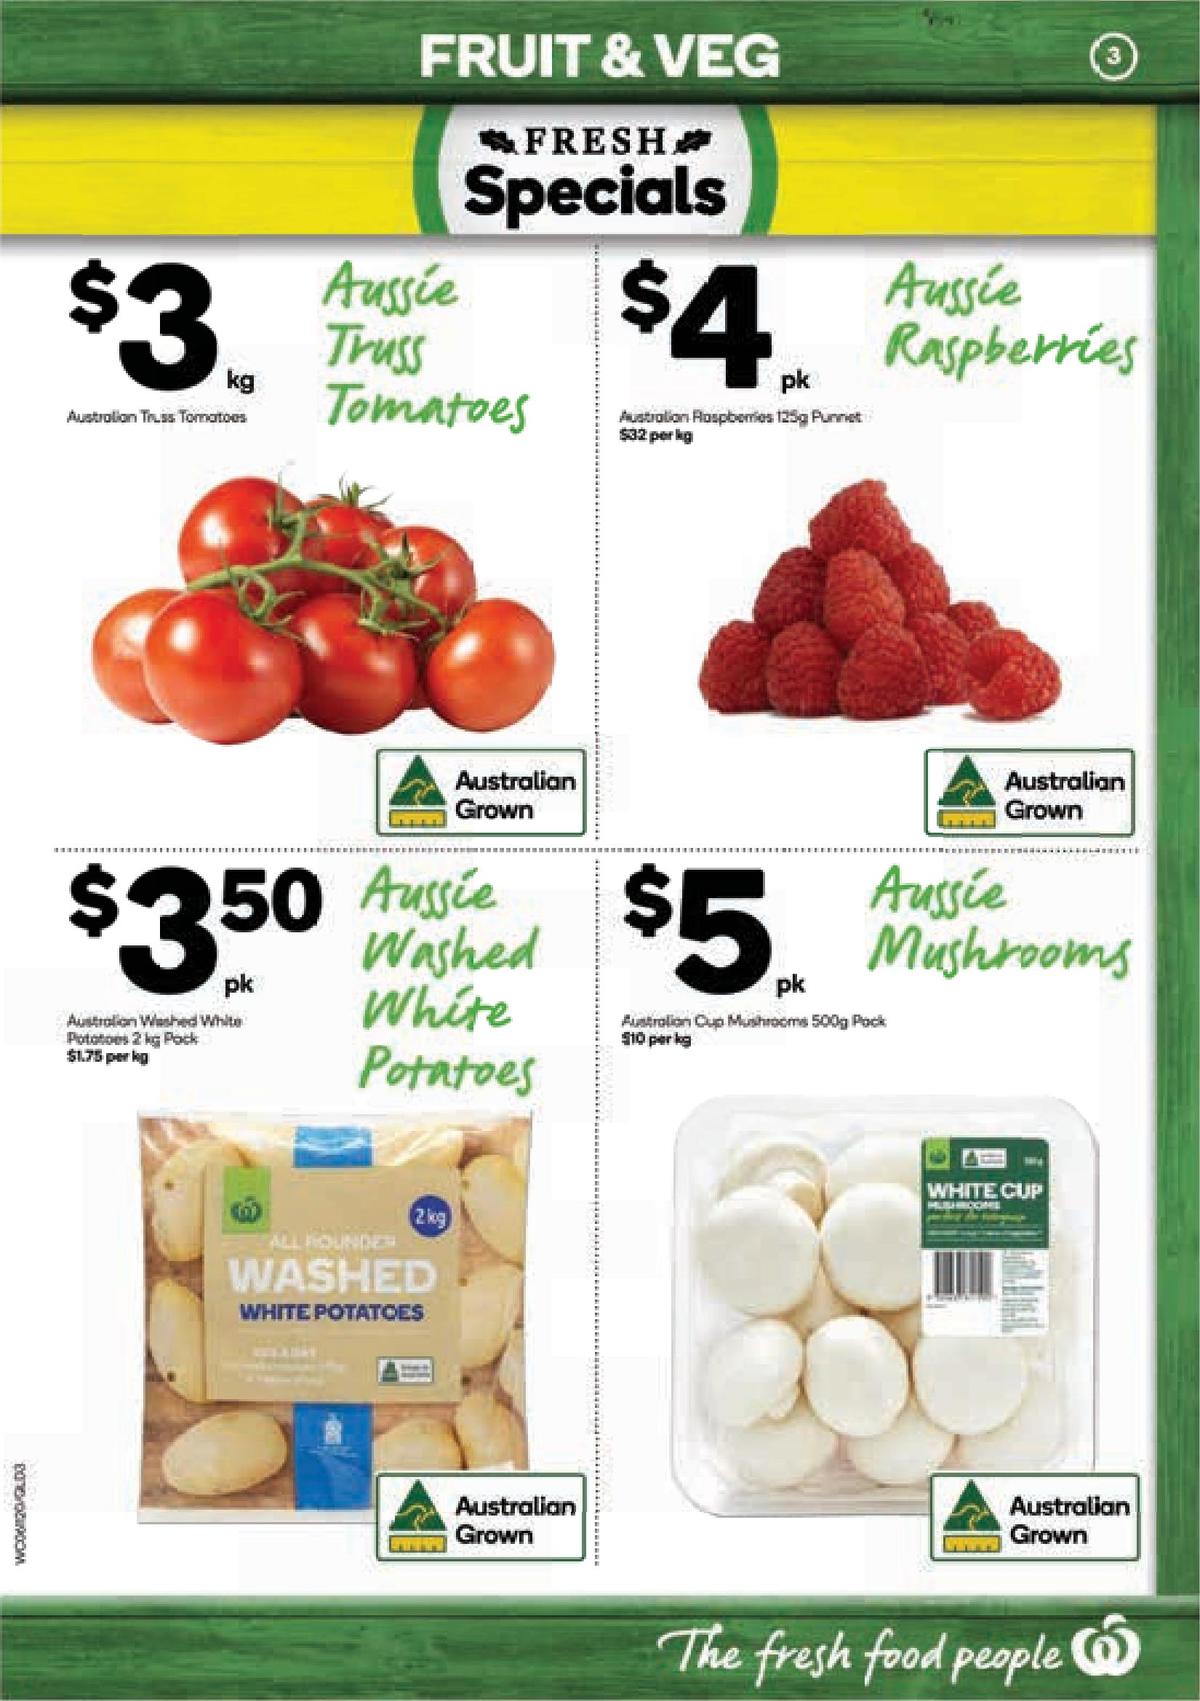 Woolworths Catalogues from 6 November